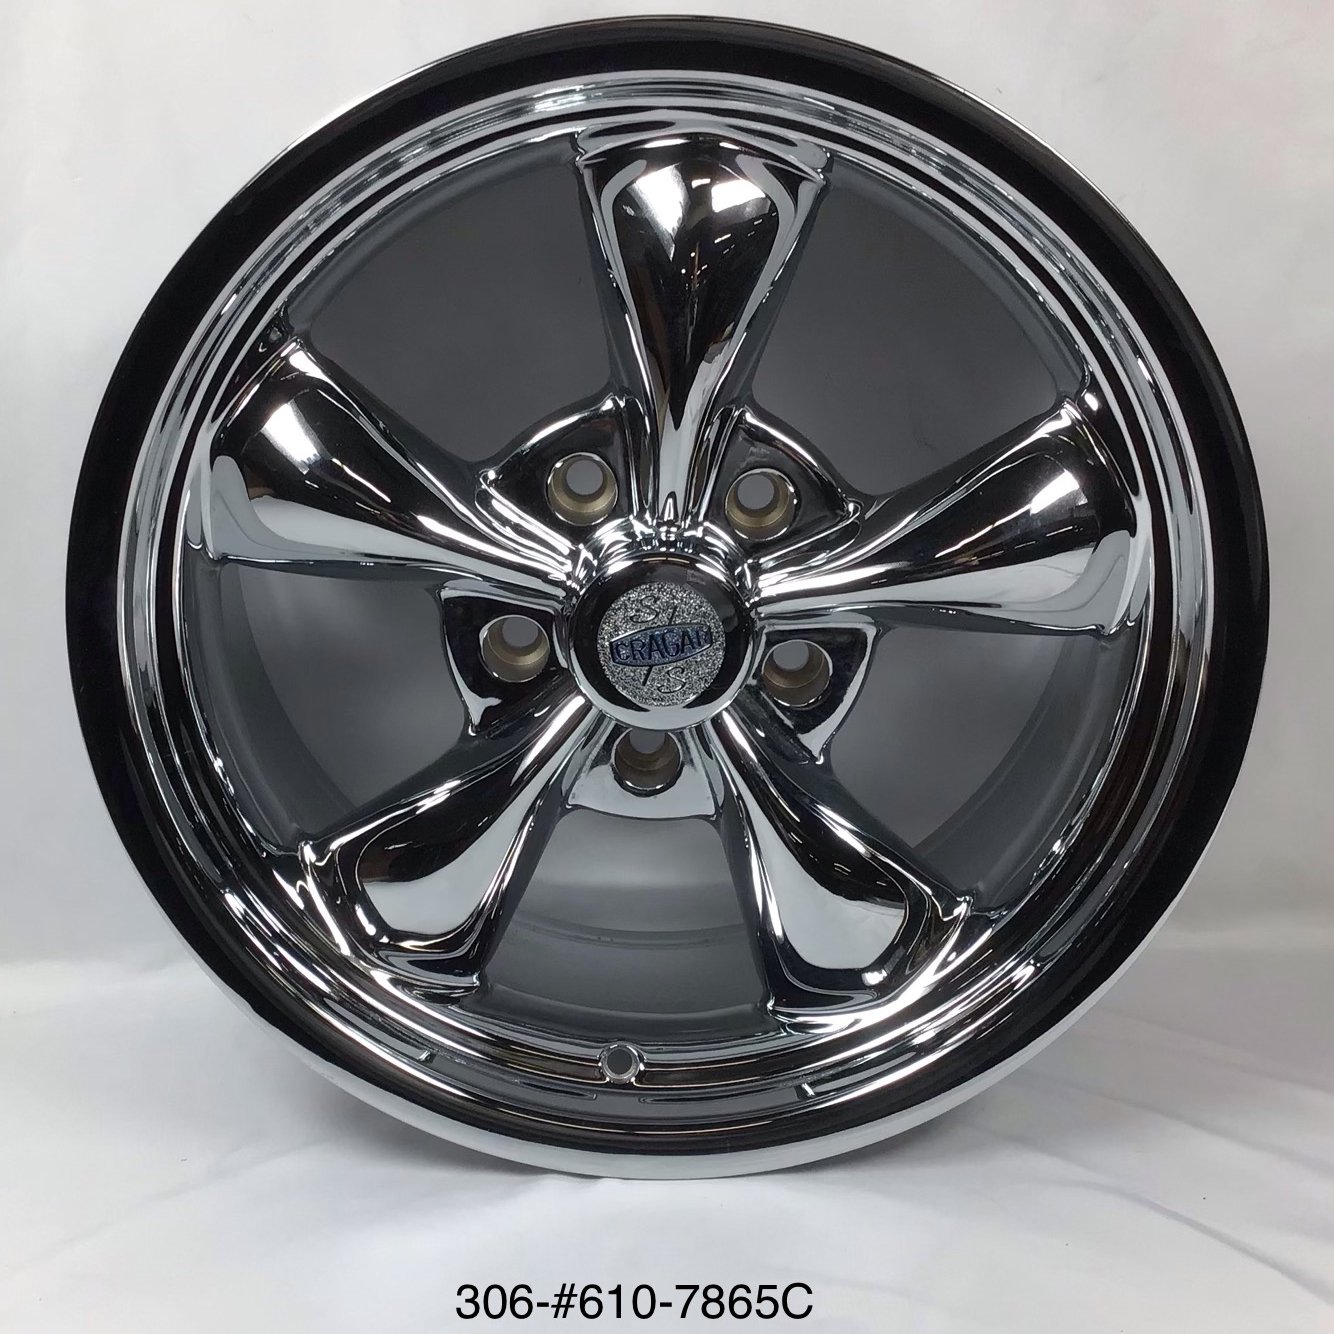 *BLEMISHED* Cragar 610 Series S/S Wheel Size: 17" x 8" Bolt Circle: 5 x 4-1/2" Rear Spacing: 5-1/8"